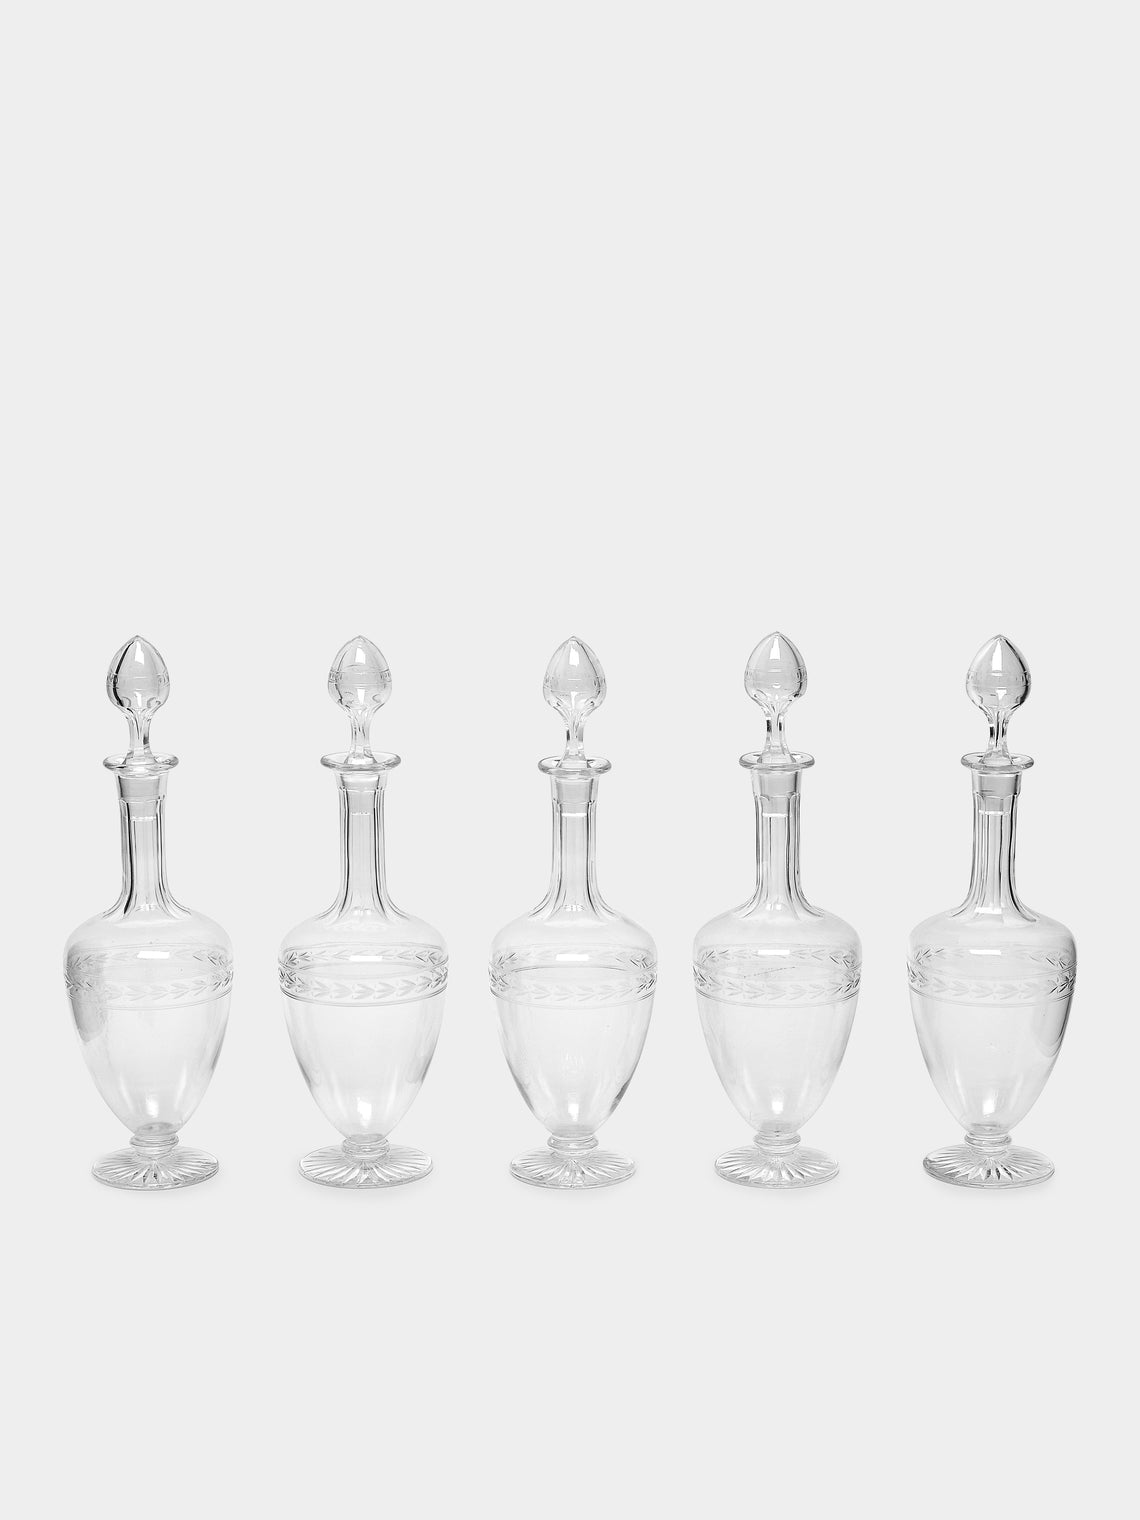 Antique and Vintage - 1930s Engraved Crystal Decanters (Set of 5) -  - ABASK